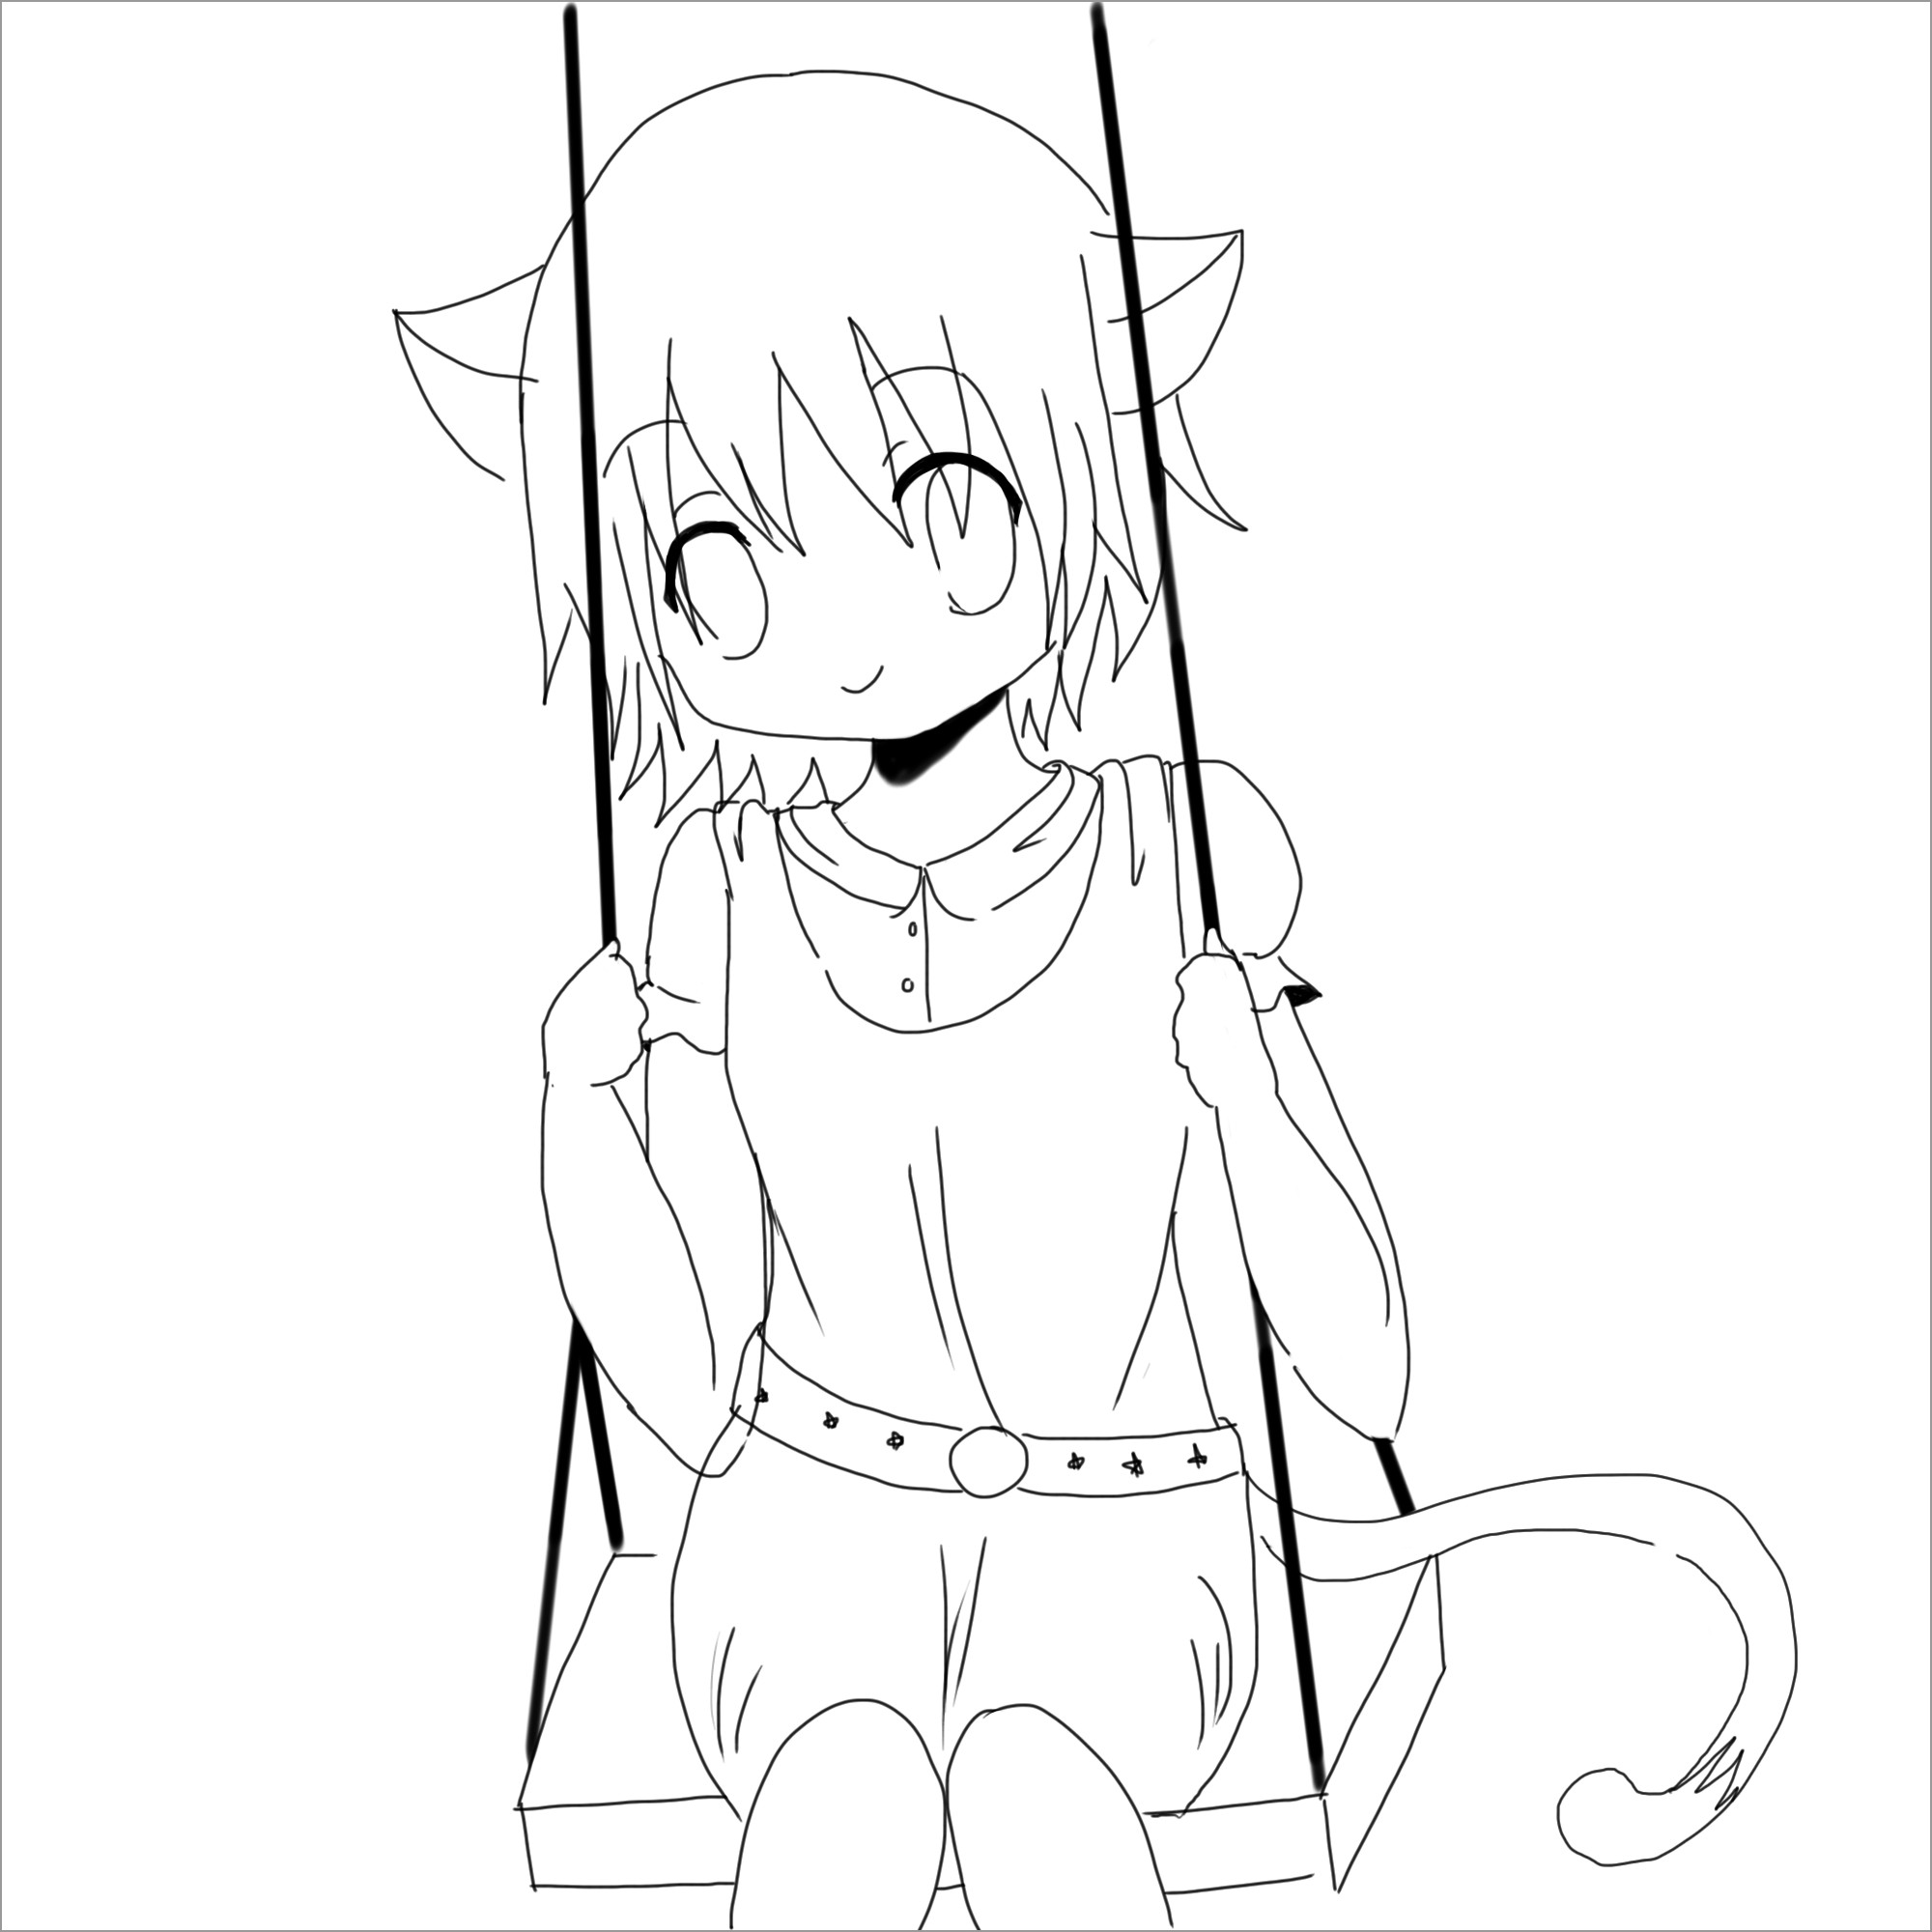 Cute Anime Cat Girl Coloring Page   ColoringBay